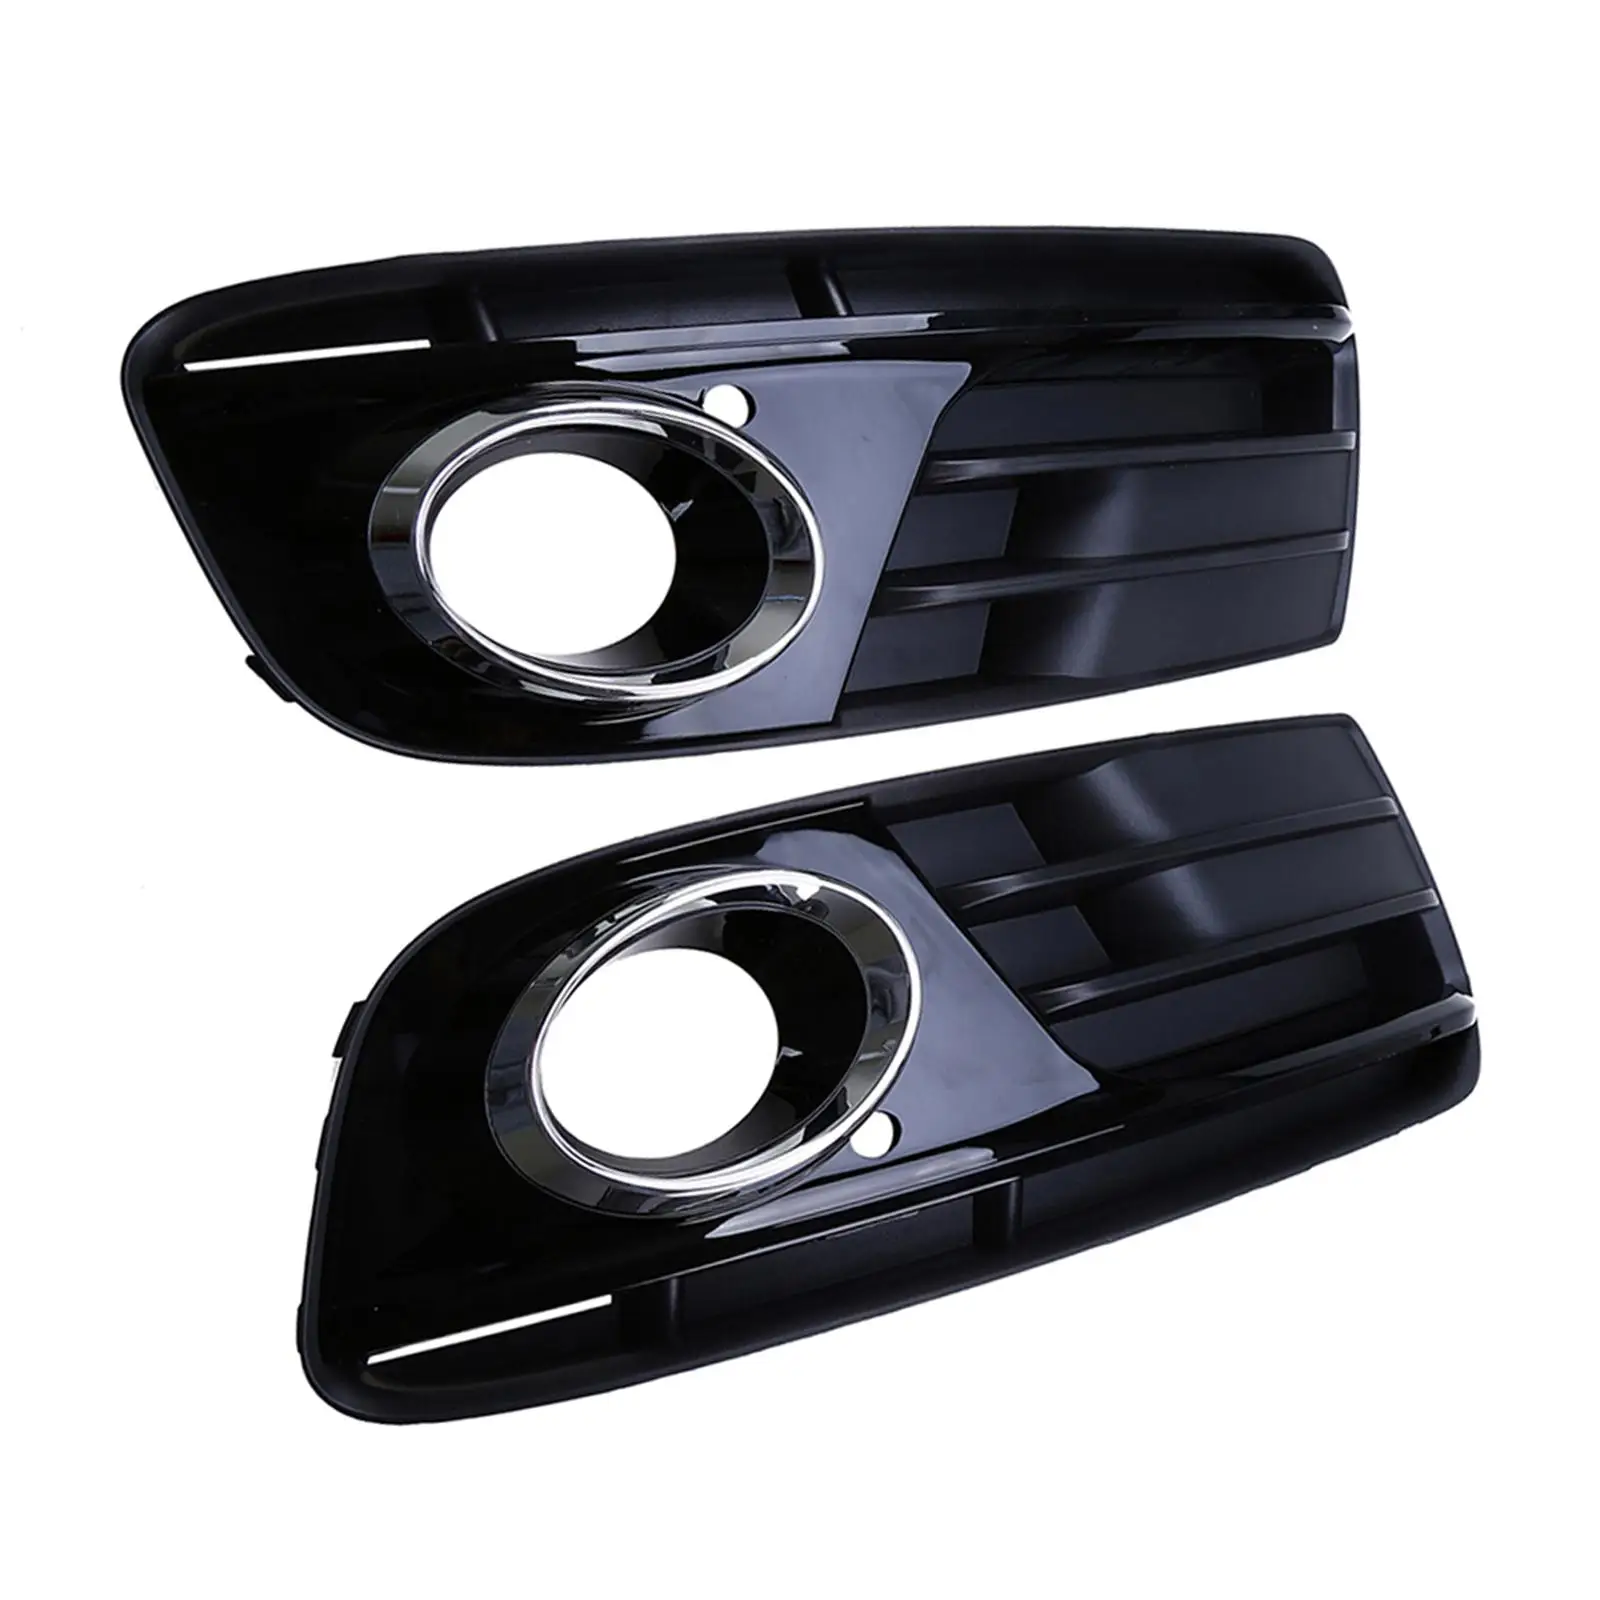 Fog Light Cover Vehicle Replacement 8R0807682 Easy to Install Accessory Durable Professional for Audi Q5 2013-2016